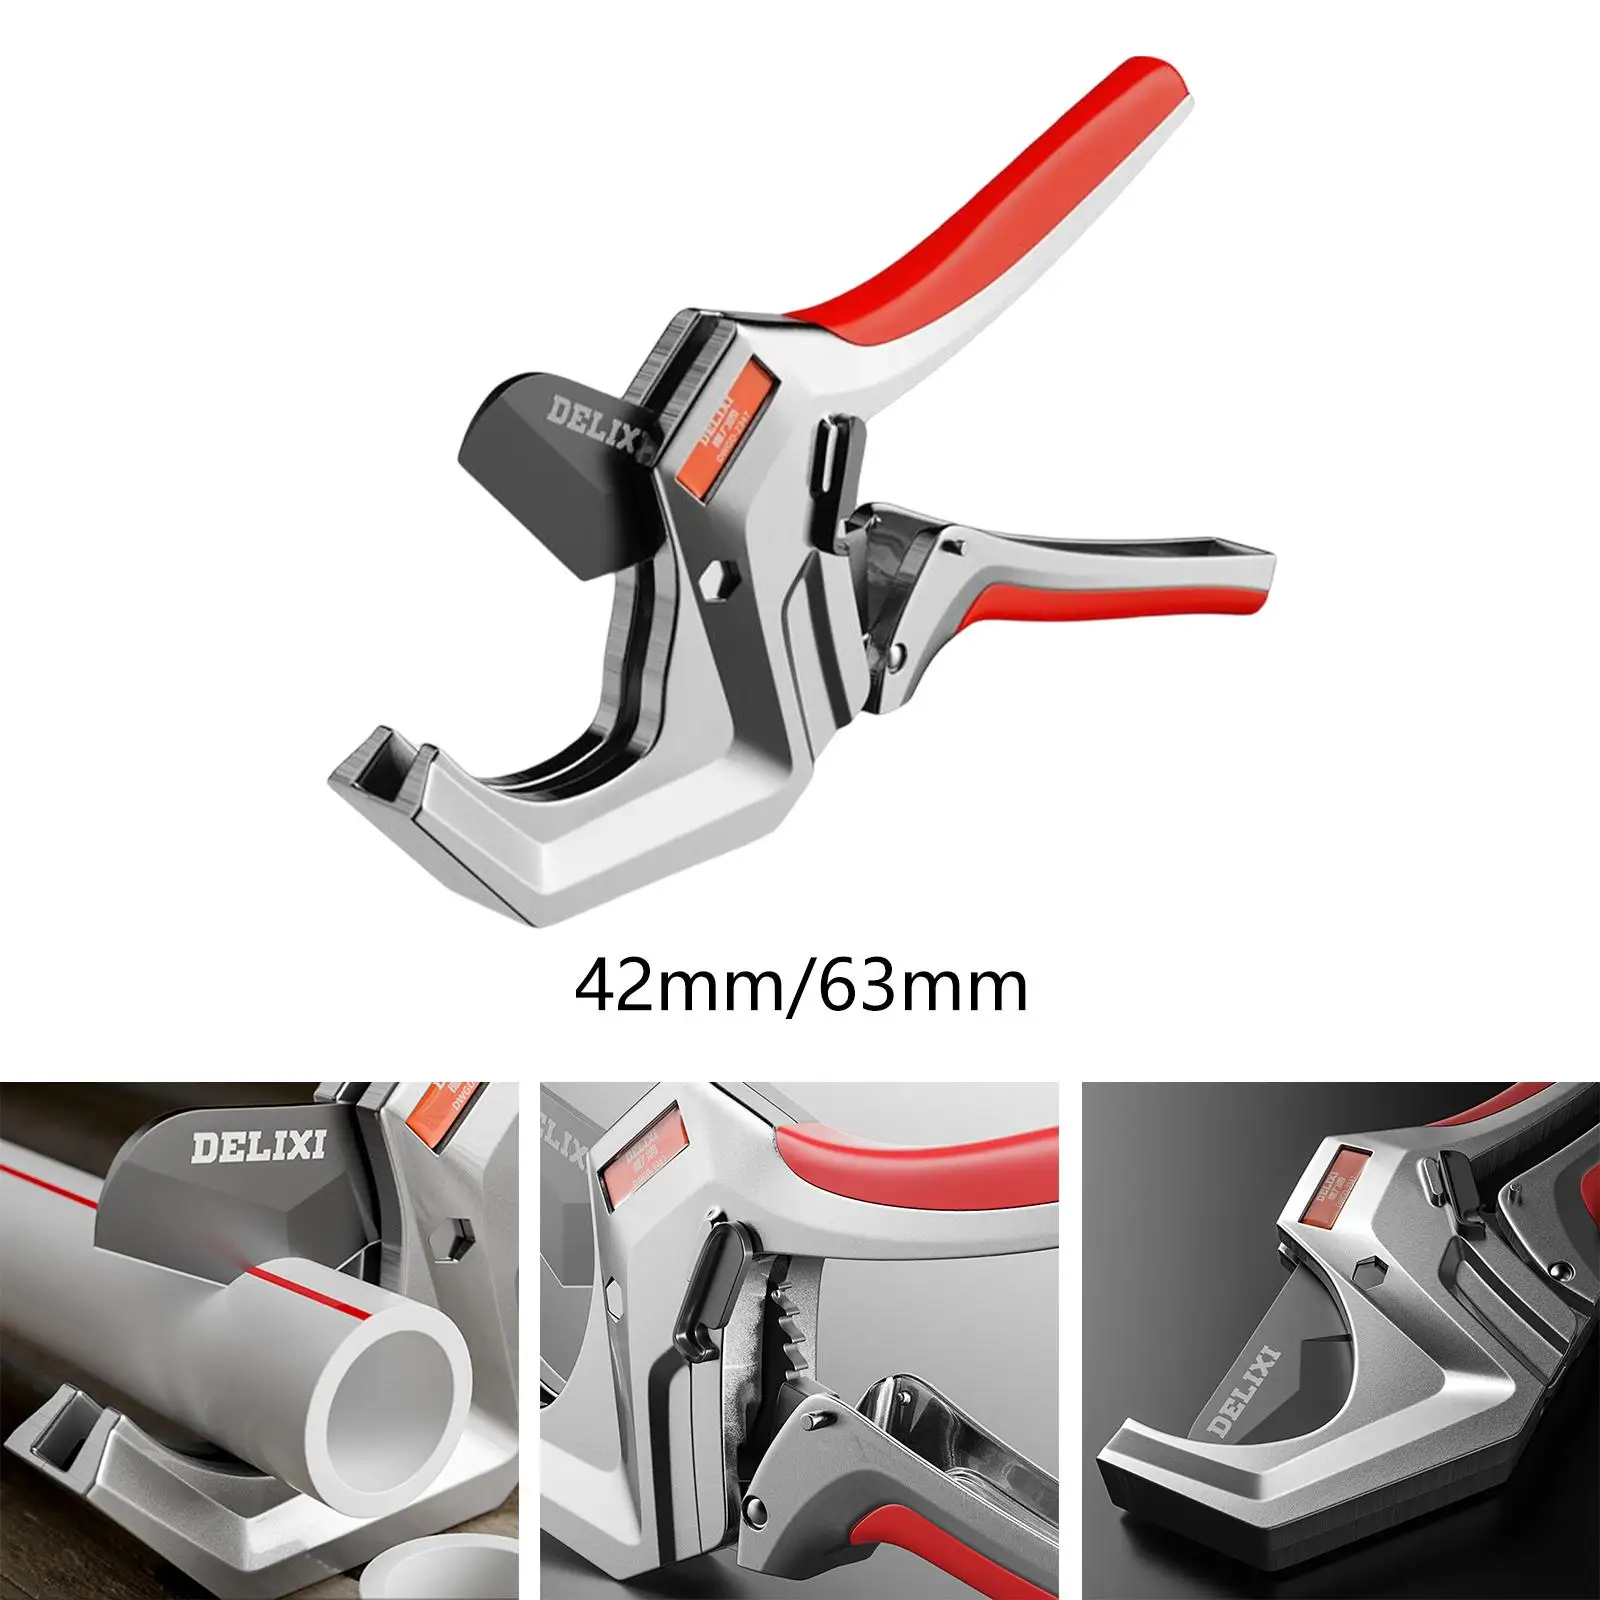 PVC Pipe Cutter Water Pipe Cutting Tool Non Slip Ergonomic Handle Plastic Tube Cutter Professional Plumbing Tools Home Working